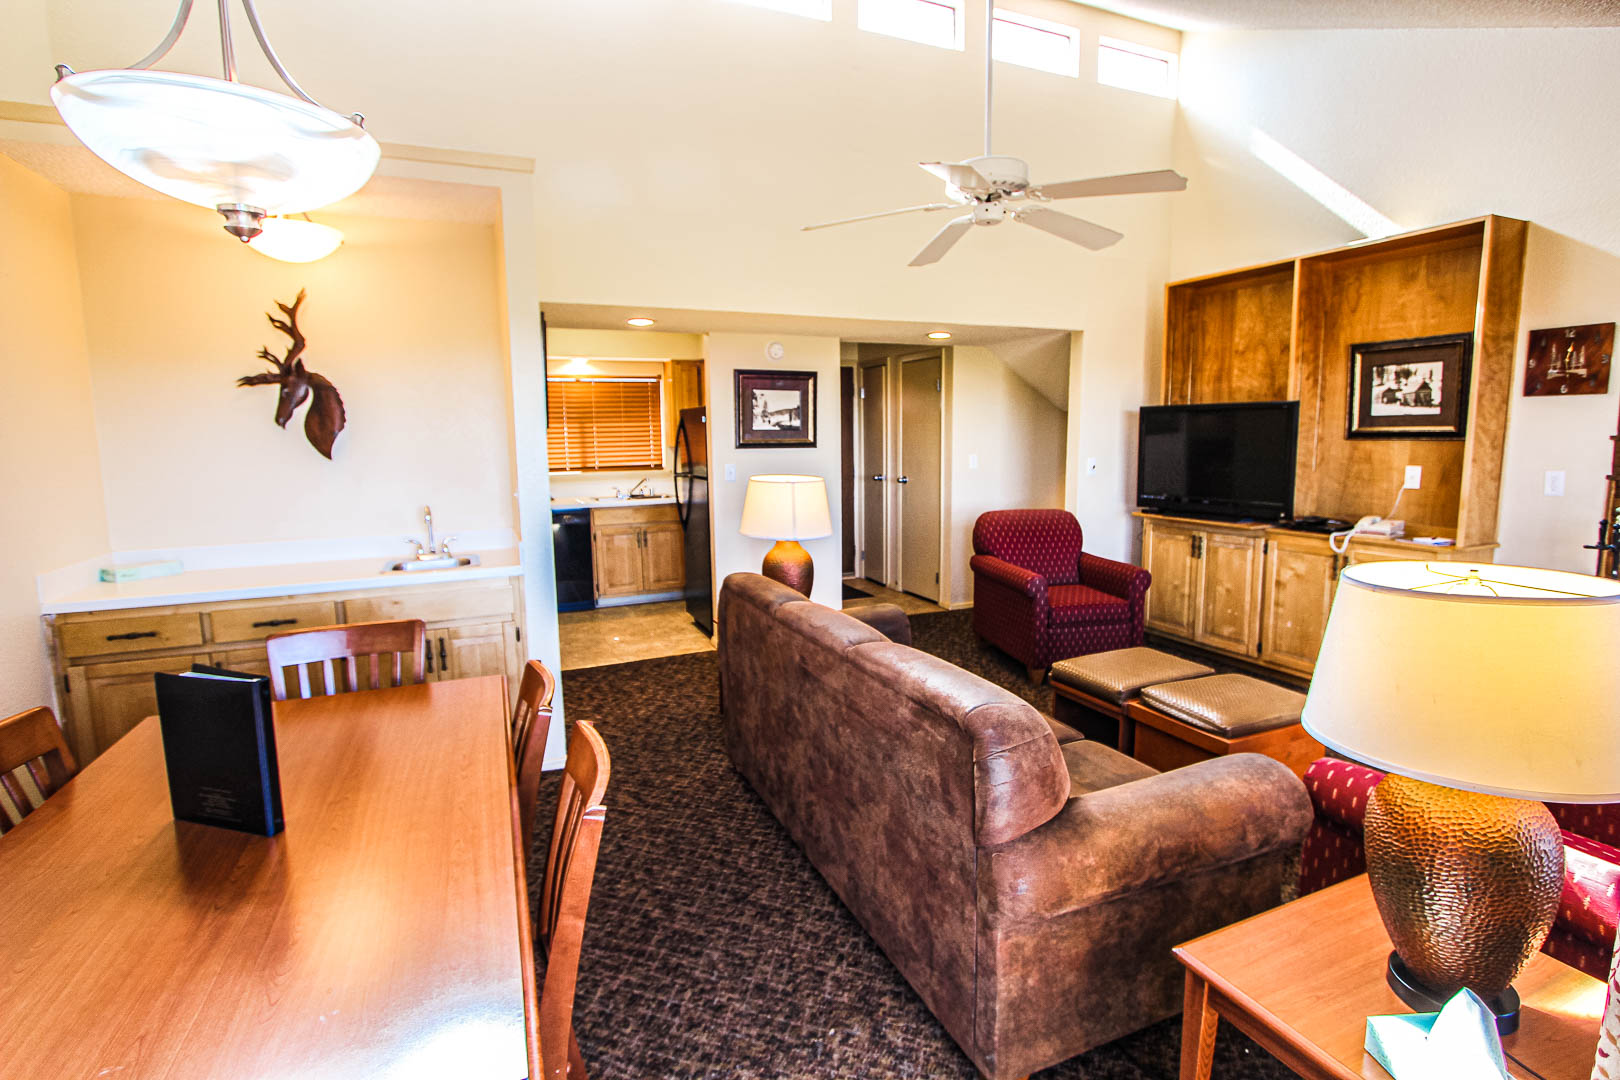 A roomy living and dining room area at VRI's Crown Point Condominiums in New Mexico.